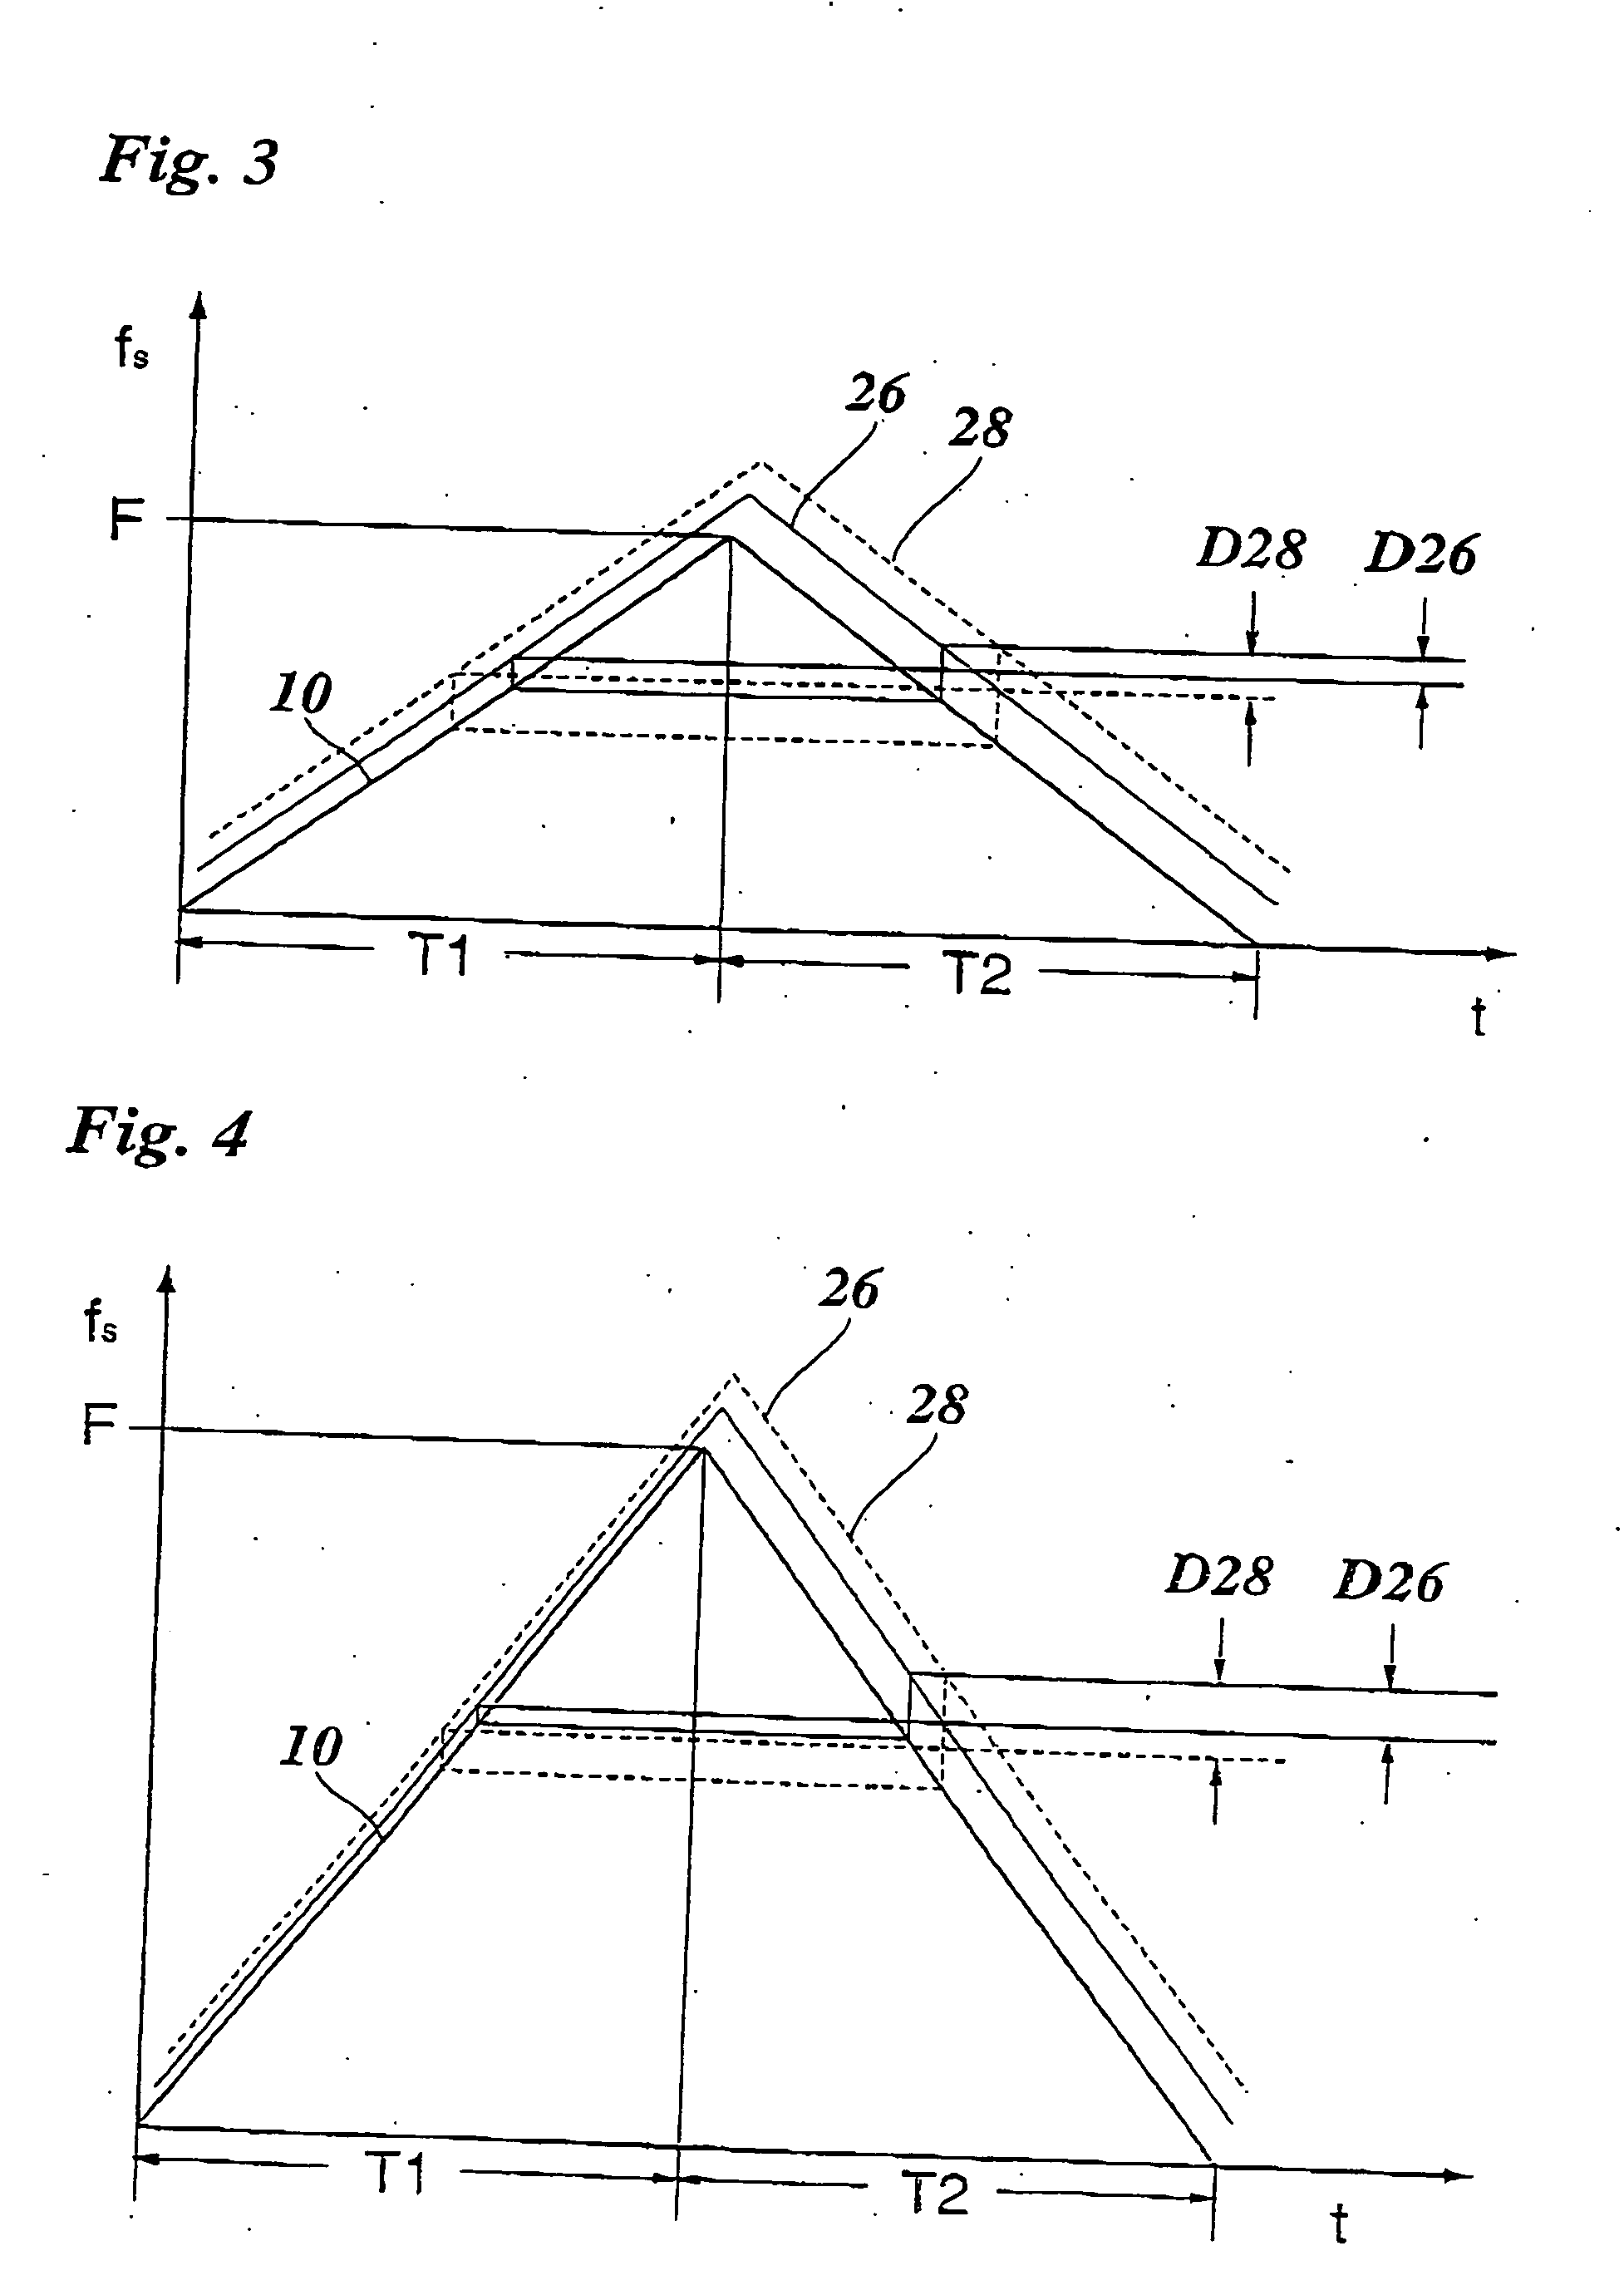 Method for measuring distances and speeds of several objects by means of an fmcw radar